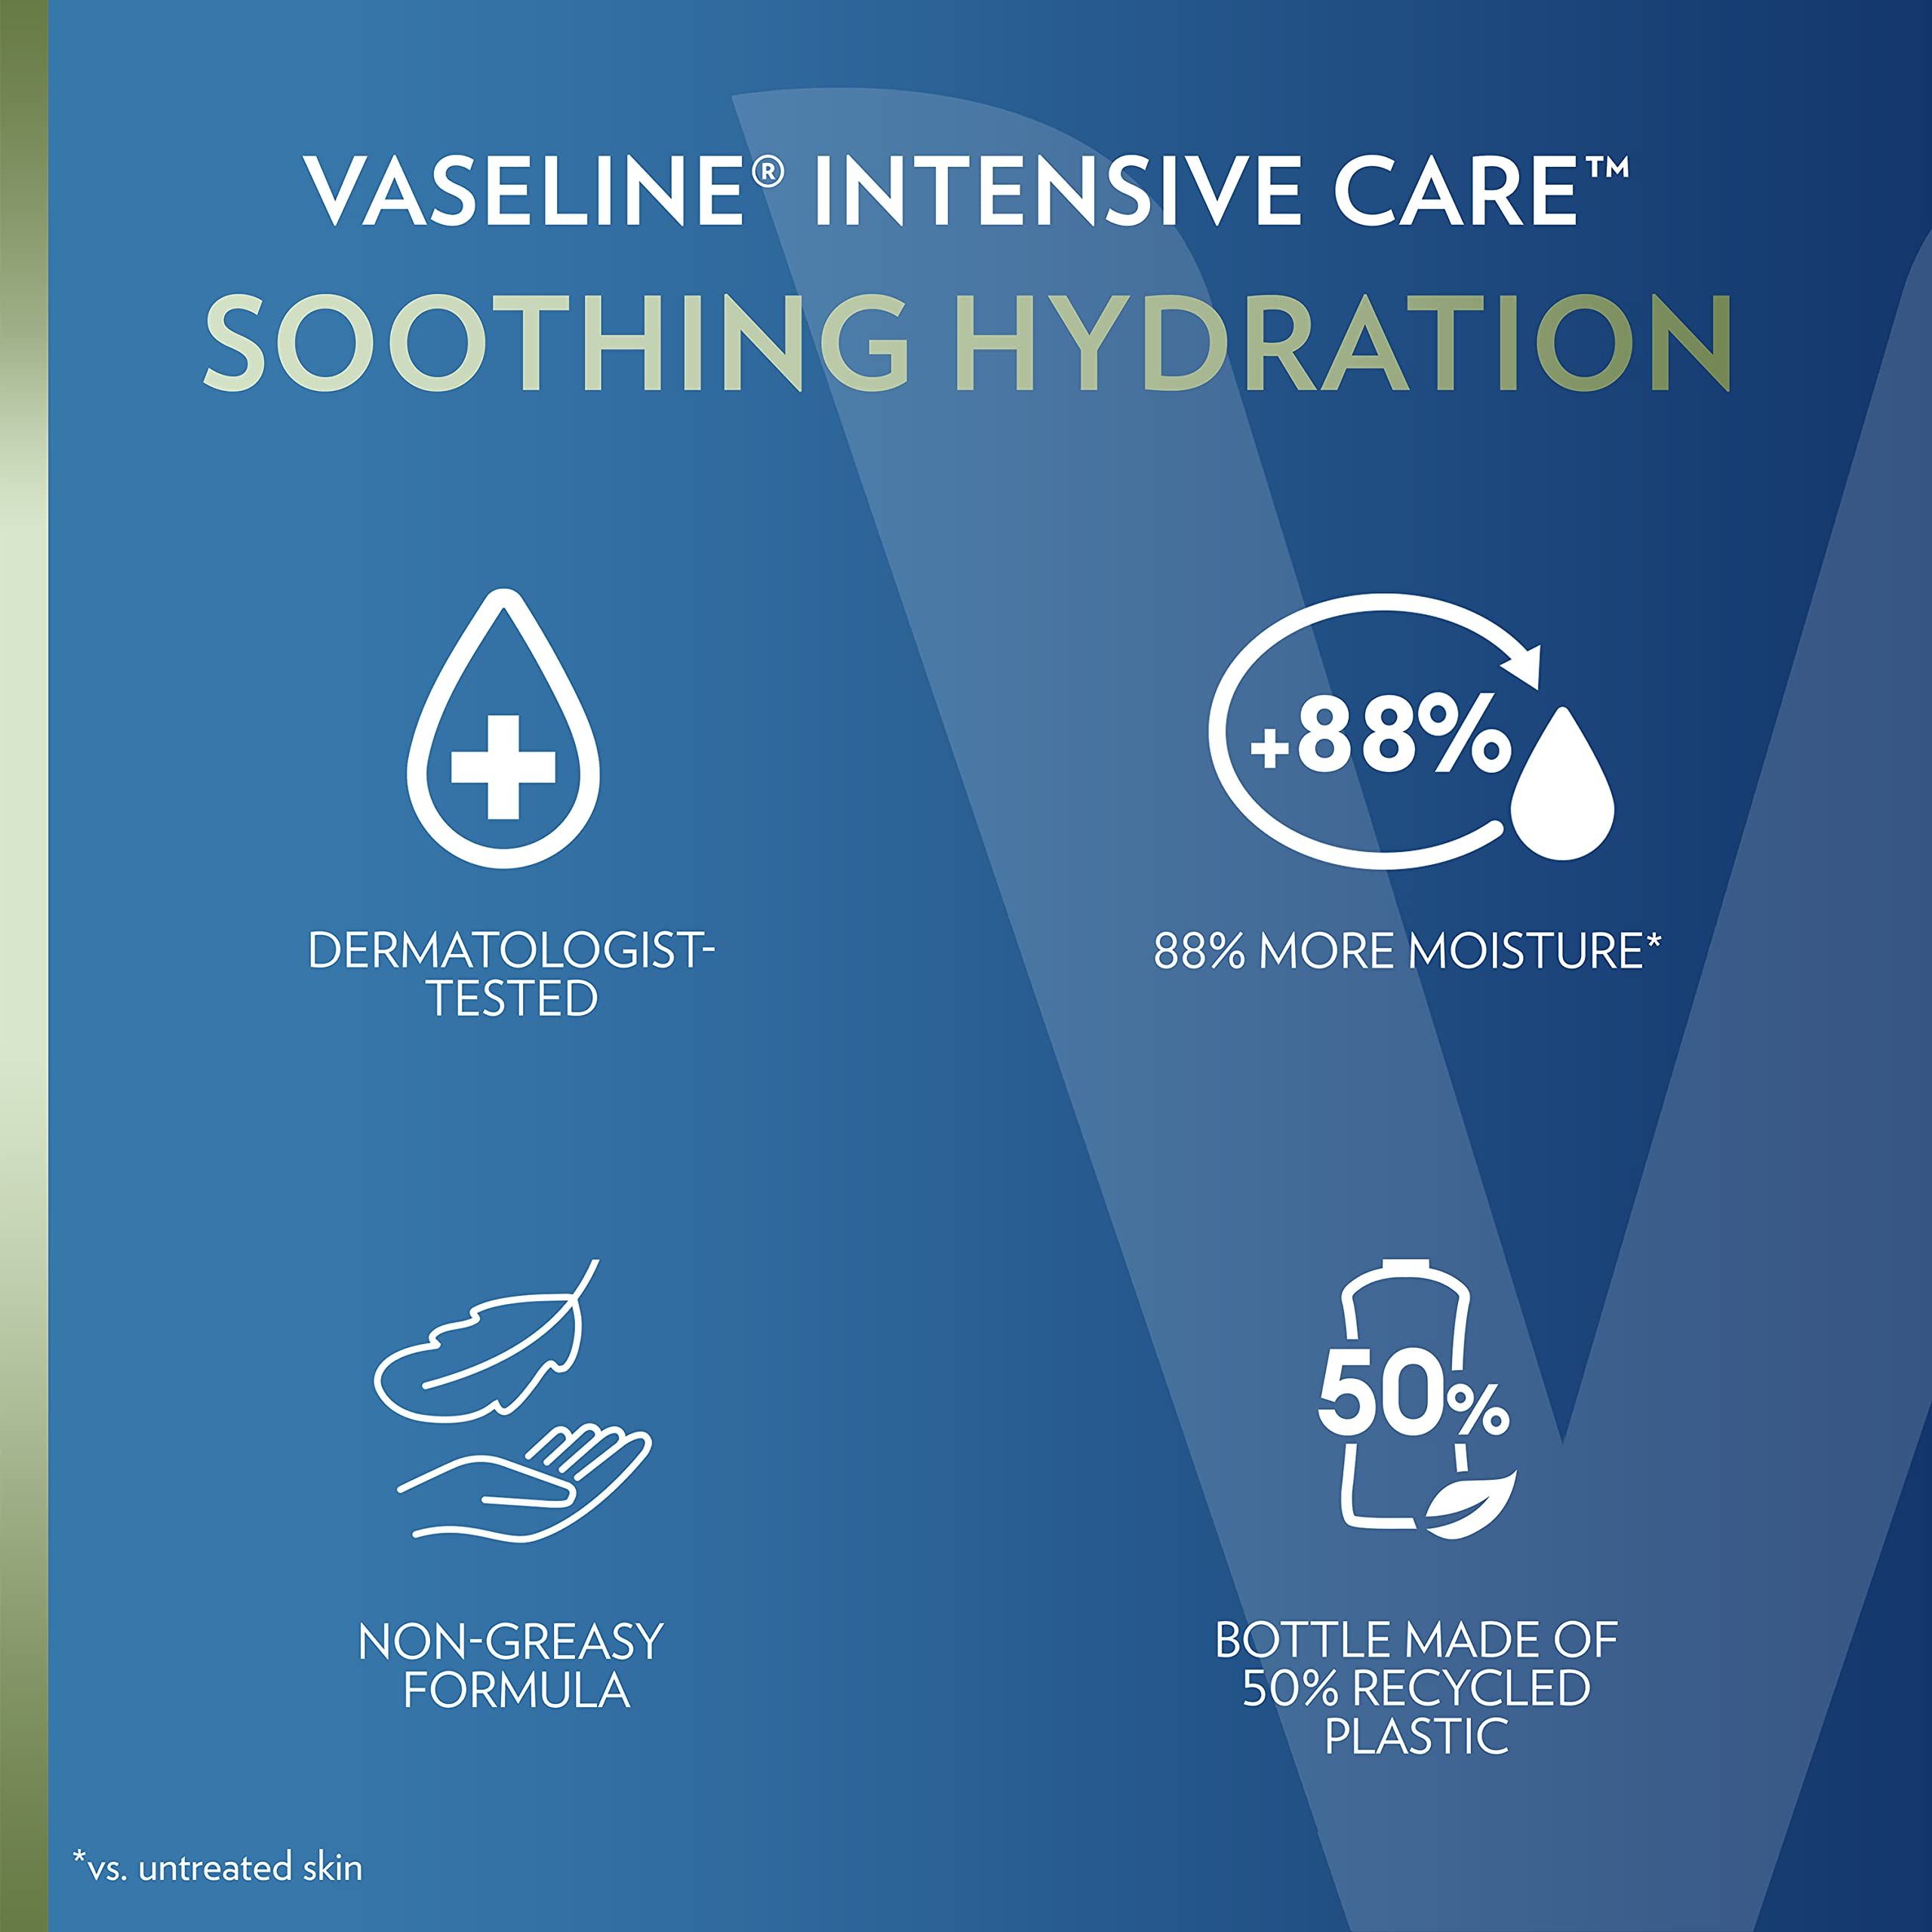 Vaseline Intensive Care Body Lotion for Dry Skin Soothing Hydration with Ultra-Hydrating Lipids + 1% Aloe Vera Extract to Refresh Dehydrated Skin 20.3 oz